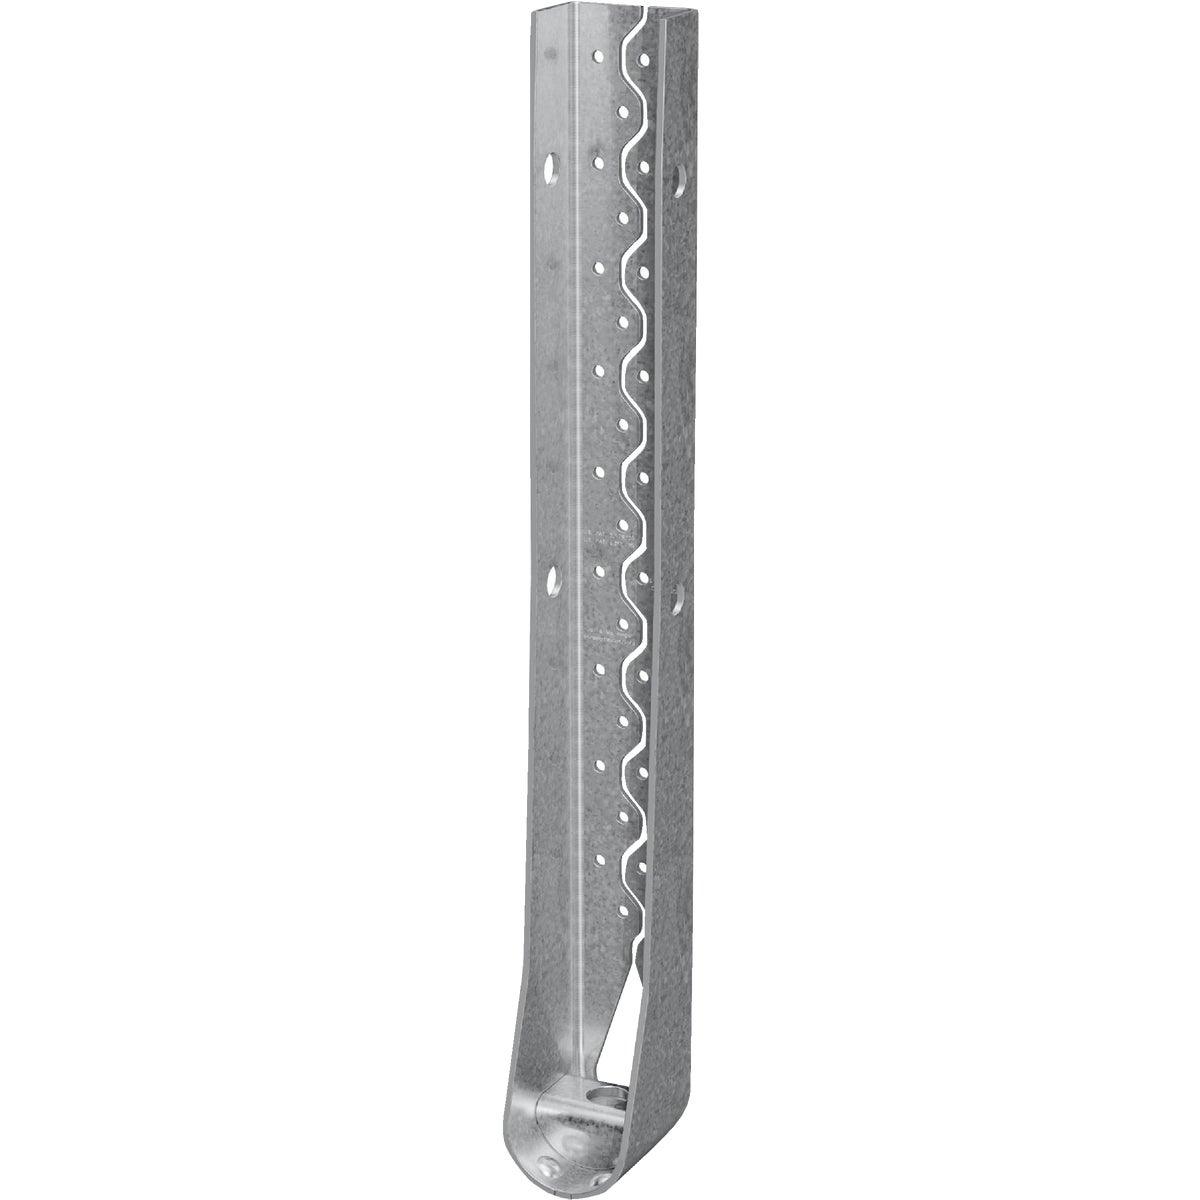 Simpson Strong-Tie 3 In. W x 25-11/16 In. H x 3-1/2 In. B 7 ga  Predeflected Holdown with SDS Screws